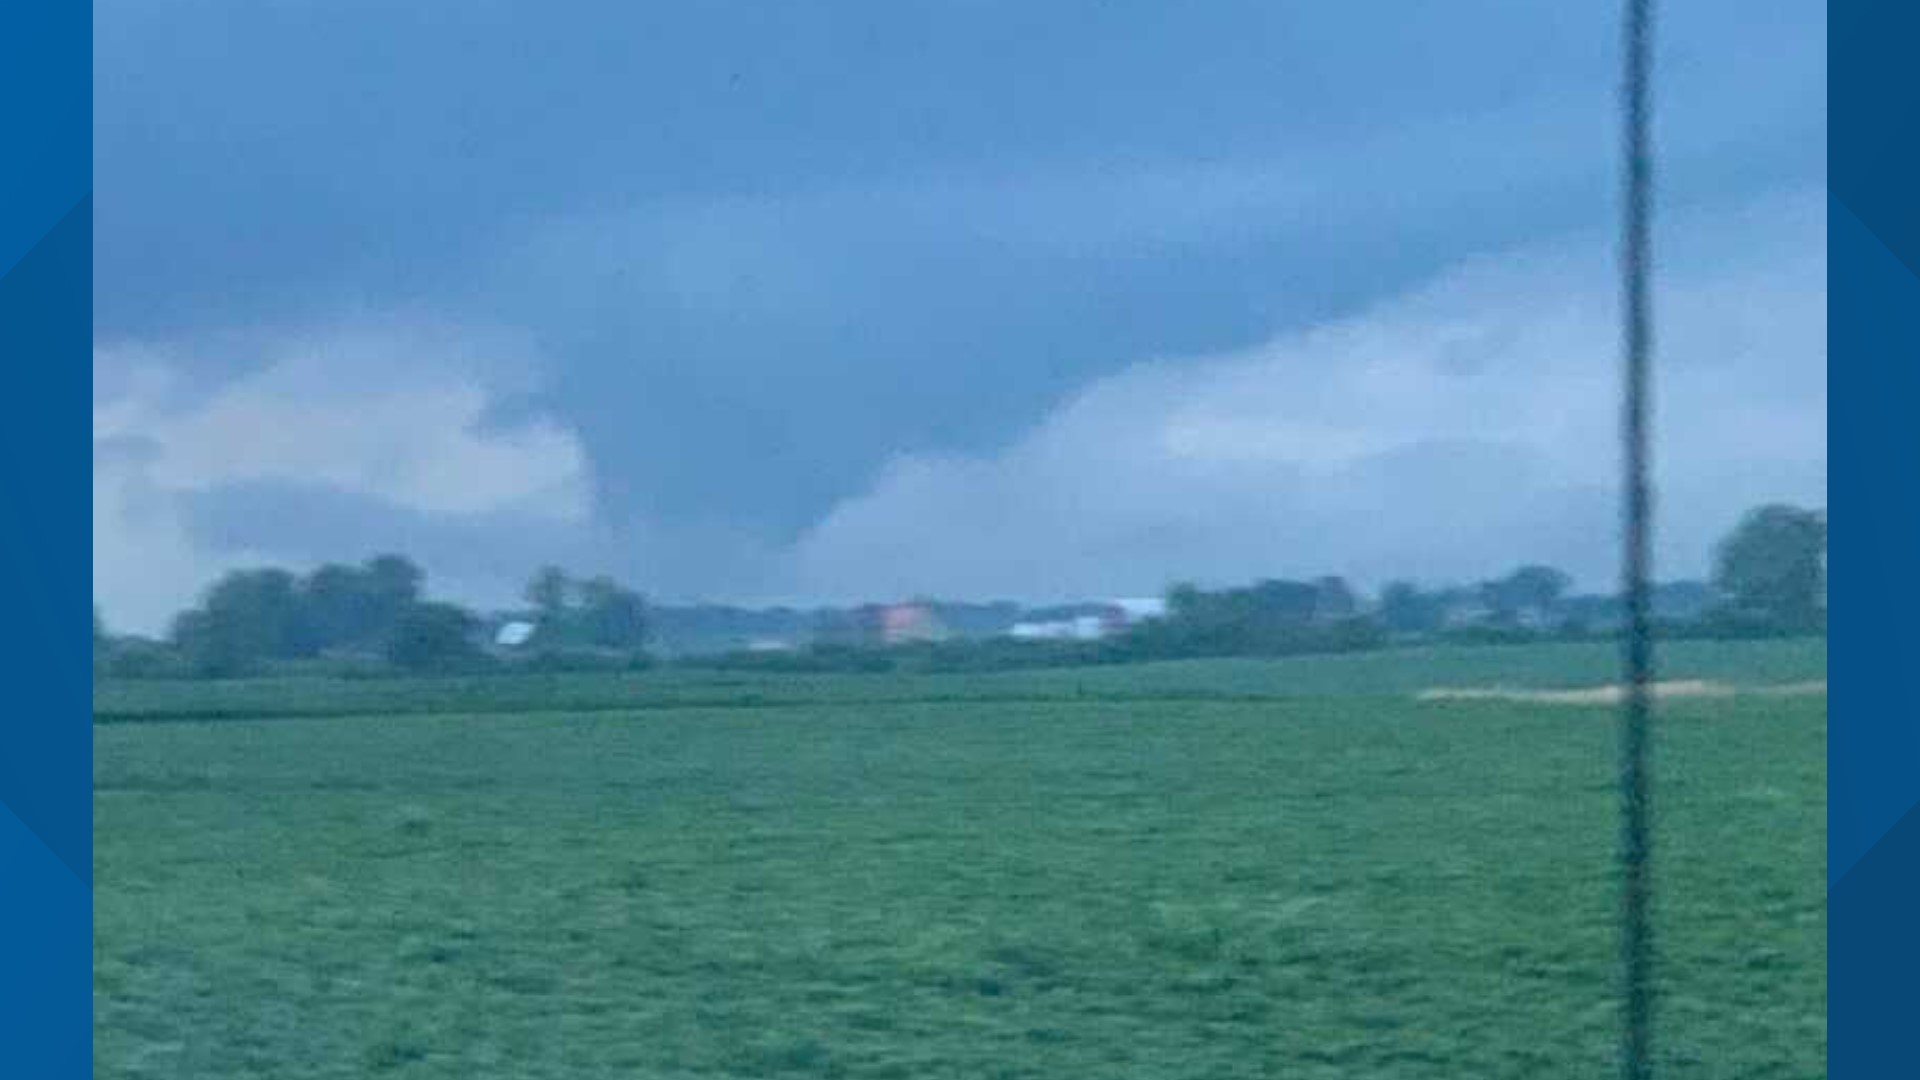 A storm cell that moved through north central Indiana Friday night produced a pair of tornadoes that touched down in Tippecanoe and Carroll counties.